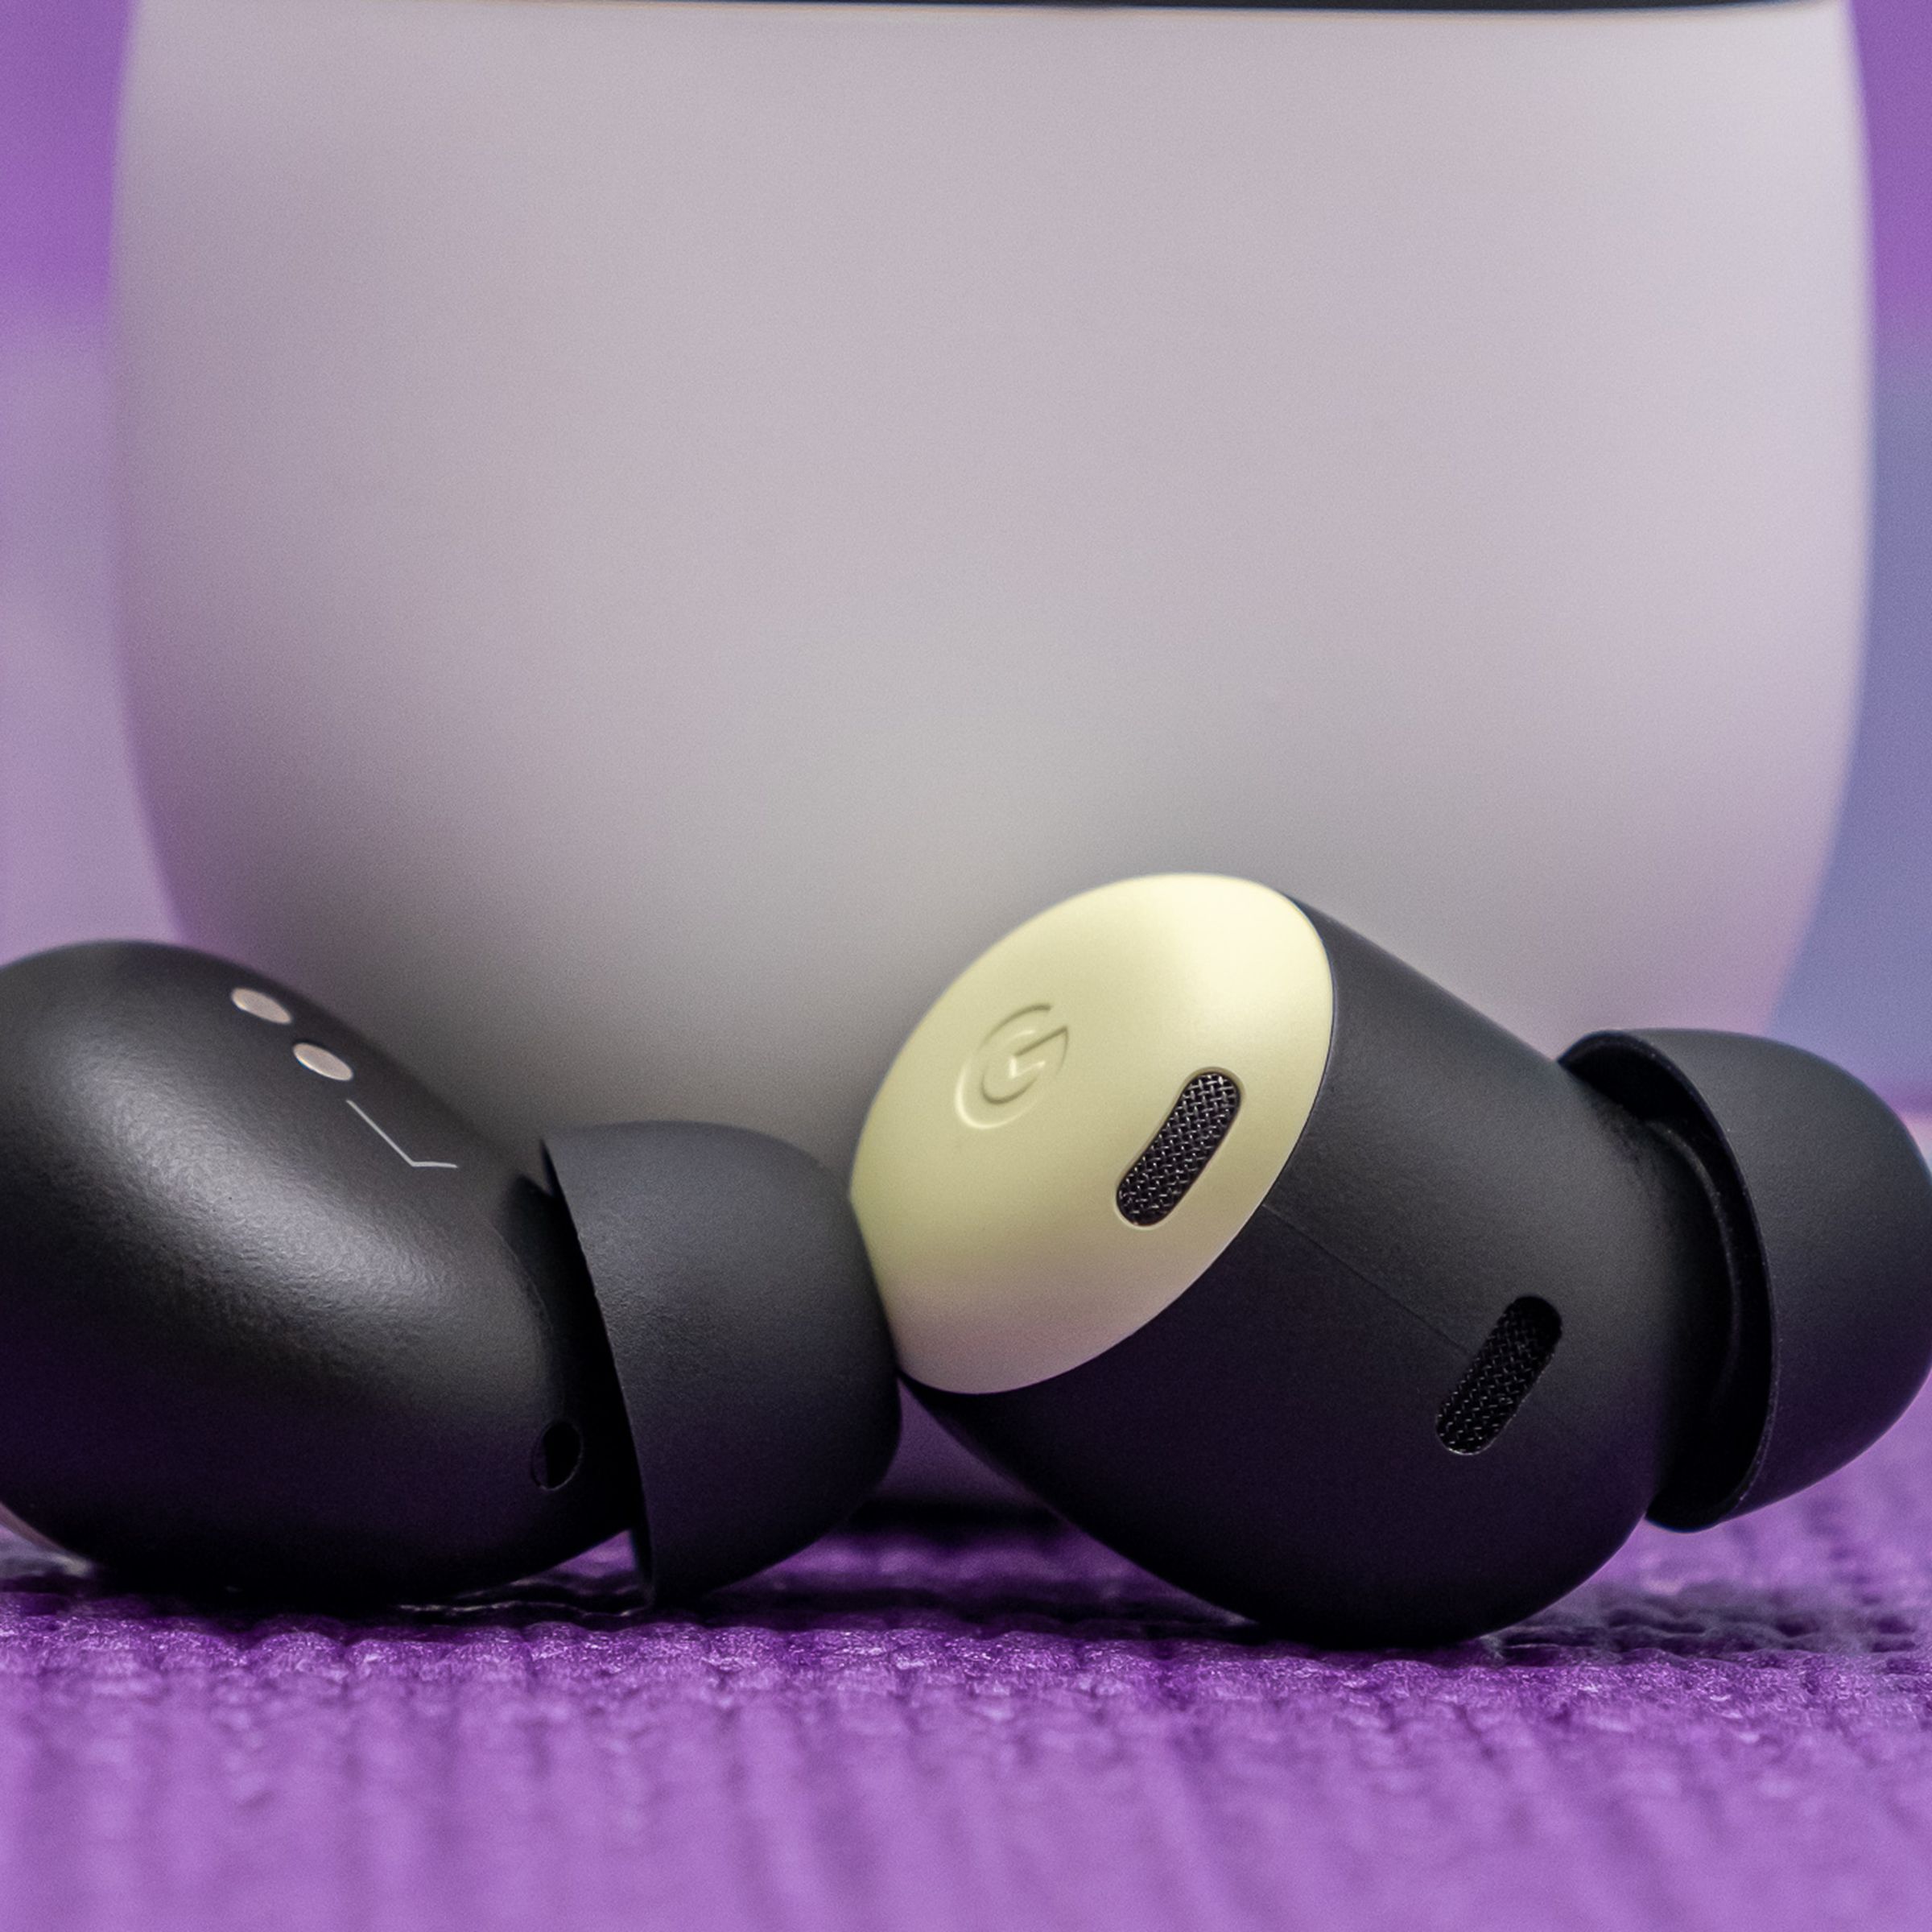 Google’s Pixel Buds Pro earbuds, in yellow lemongrass color, resting at the foot of their white charging case on a tabletop.